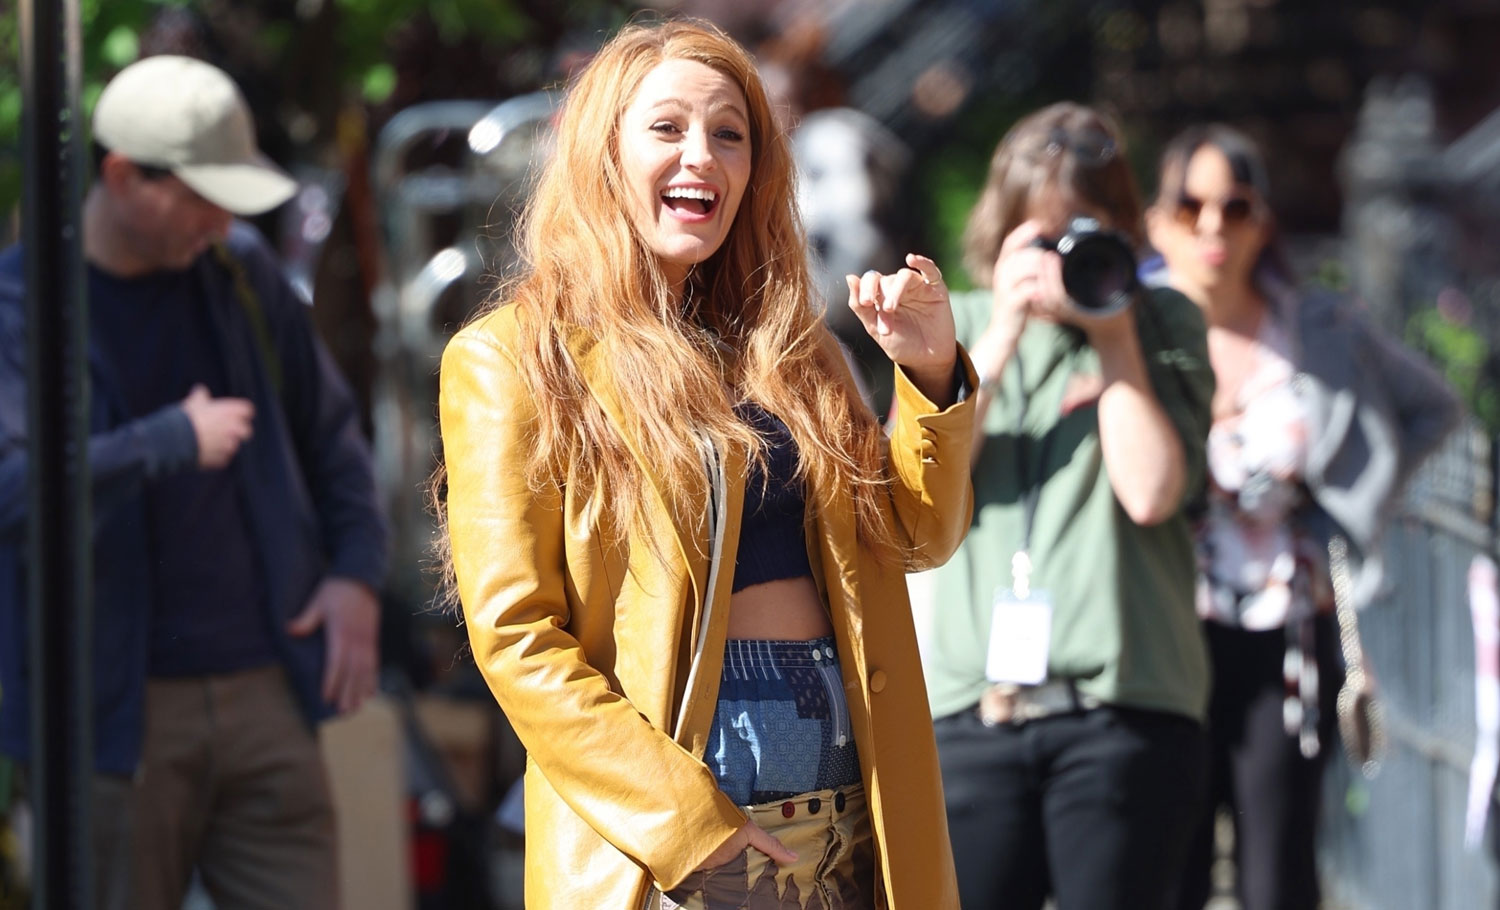 Blake Lively Wears Pants Over Her Pants in New Photos from ‘It Ends With Us’ Movie Set